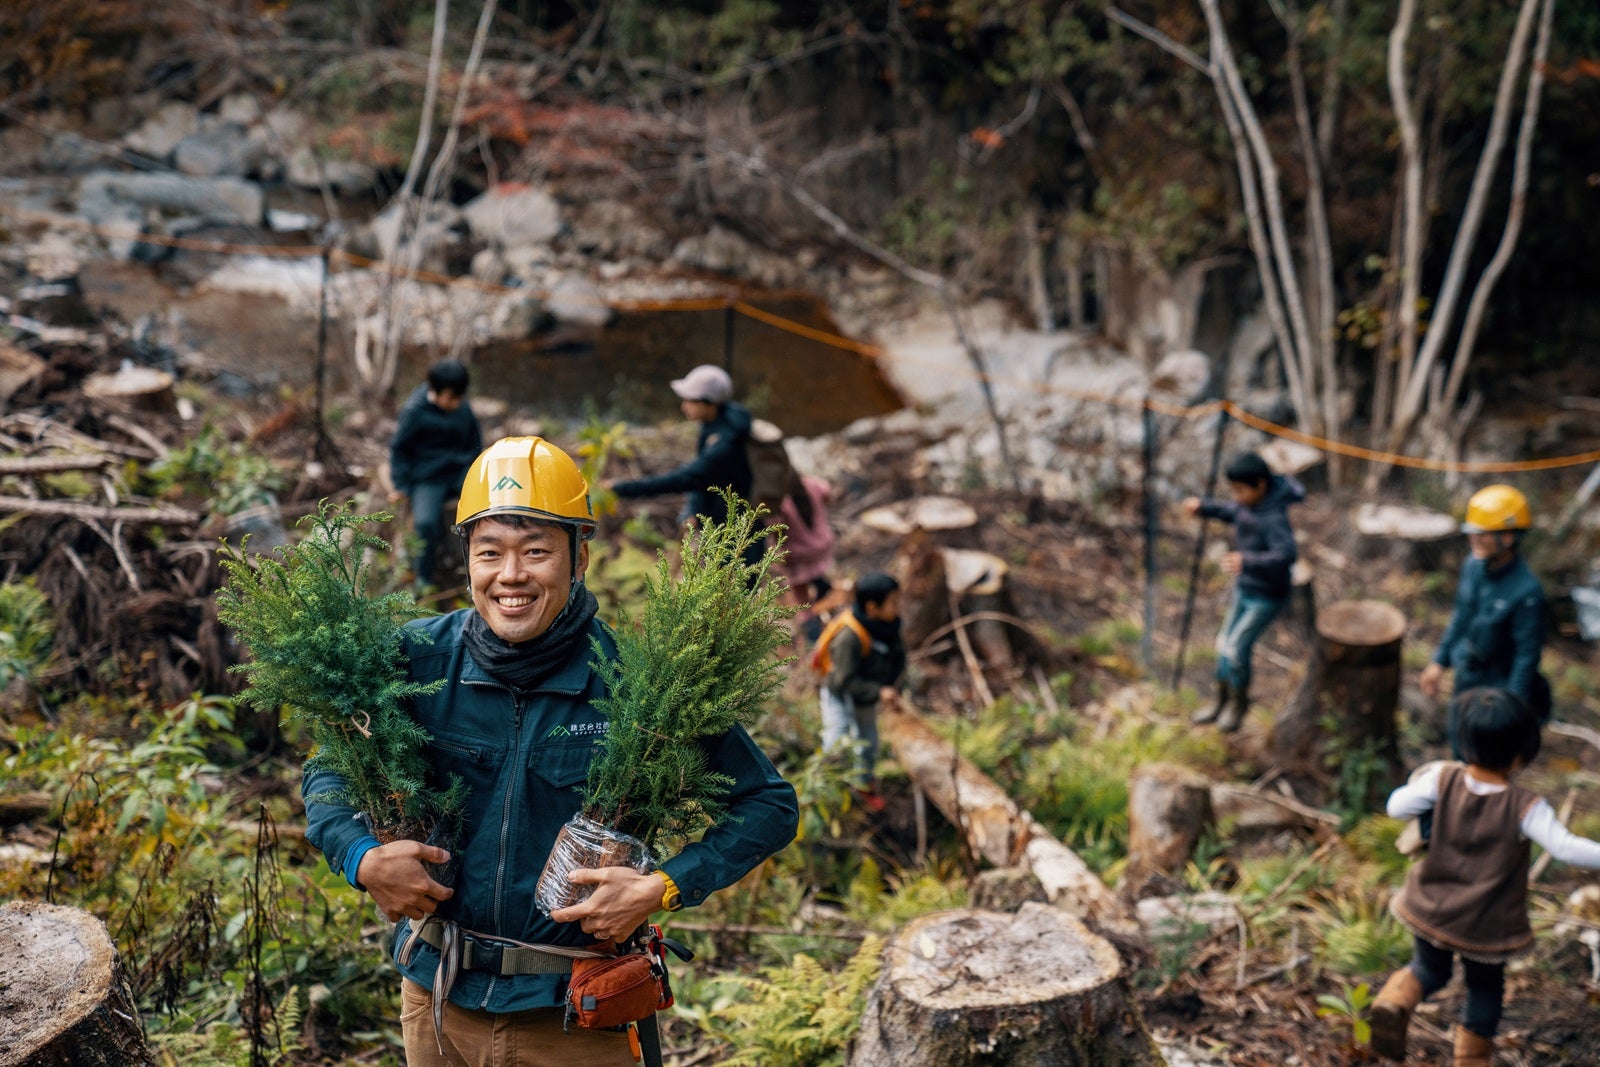 A man in a yellow hard hat carrying two trees to plant in the forest